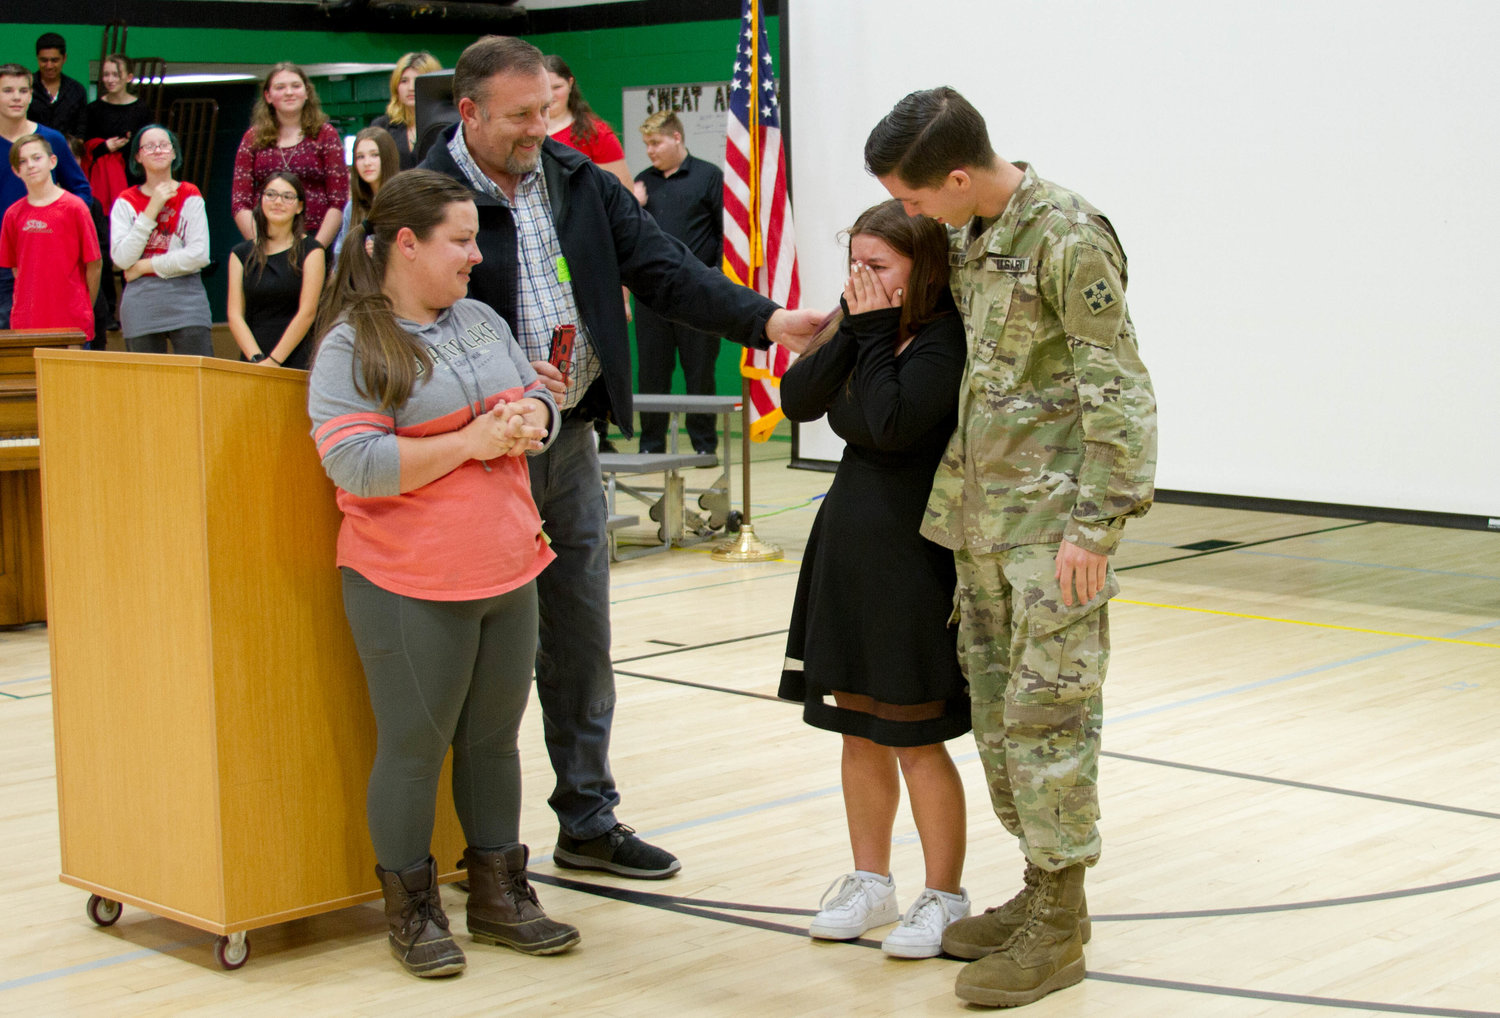 Abigail Alway, an eighth grader at Woodland Middle School, was surprised during the school’s Veterans Day assembly with the return of her uncle, Sergeant Edward Mayer II, who helped raise her.